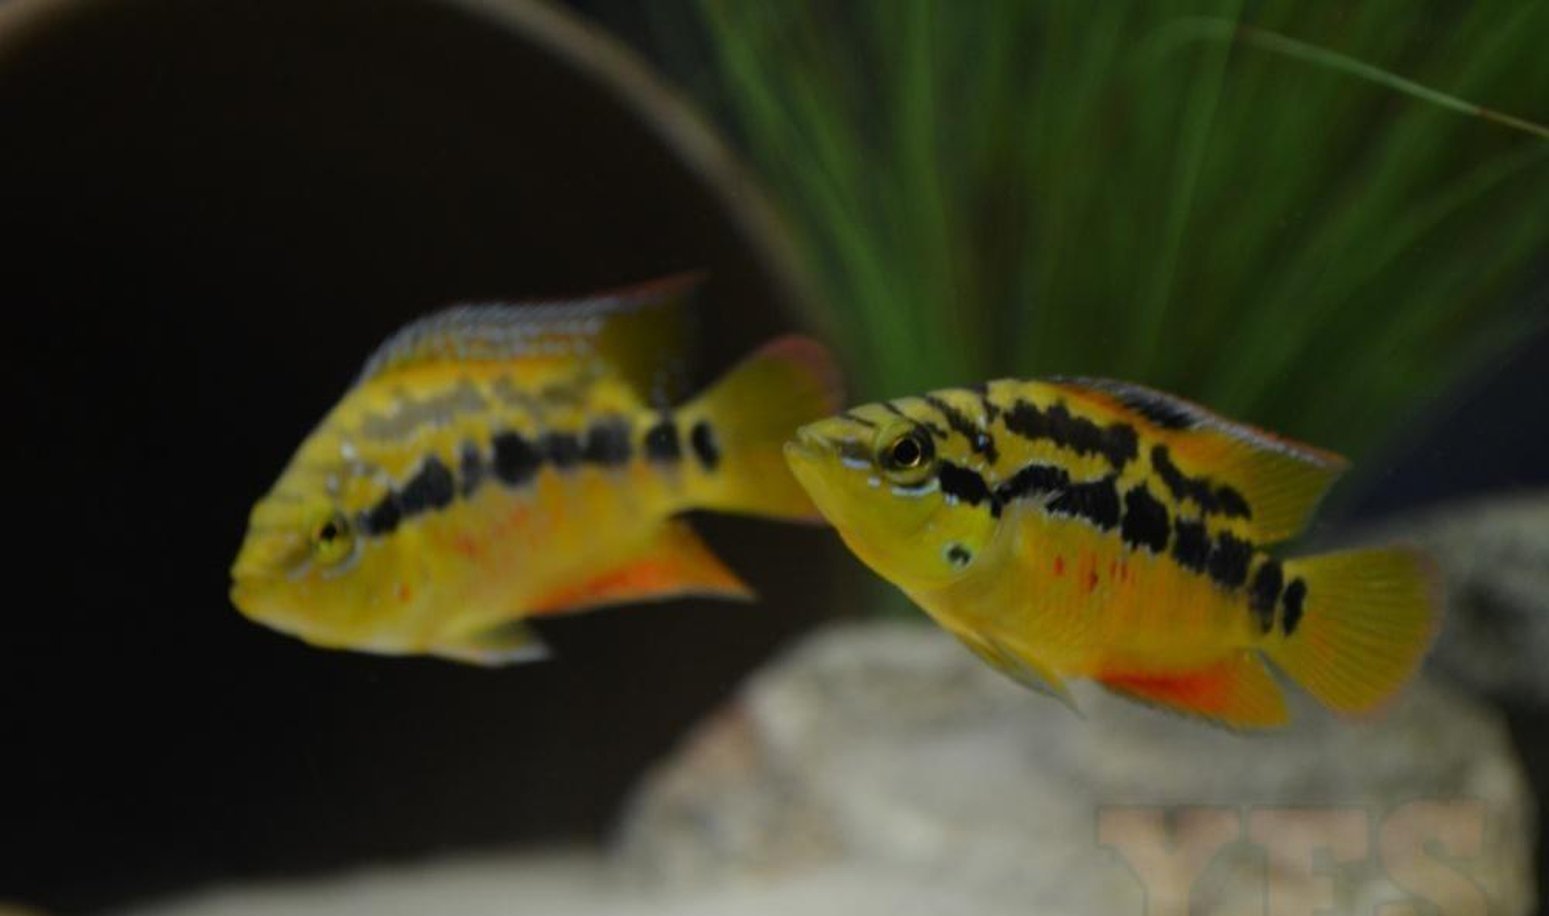 X10 Salvini Cichlid South American Sml/Med 1"-2" Fresh Water-Freshwater Fish Package-www.YourFishStore.com